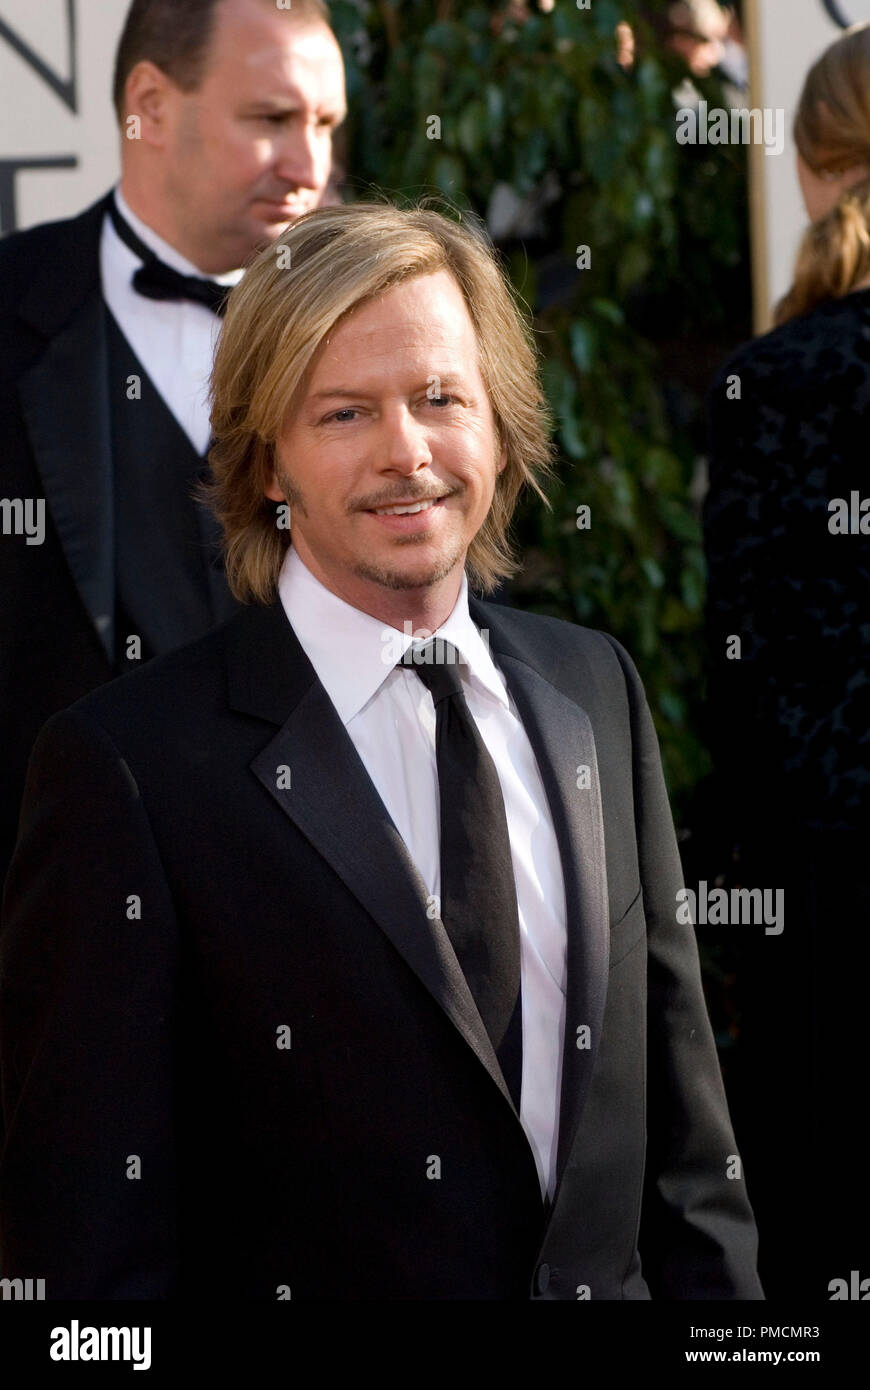 Hollywood Foreign Press Association presents the 2007 'Golden Globe Awards - 64th Annual' (Arrivals) David Spade 1-15-07 Stock Photo